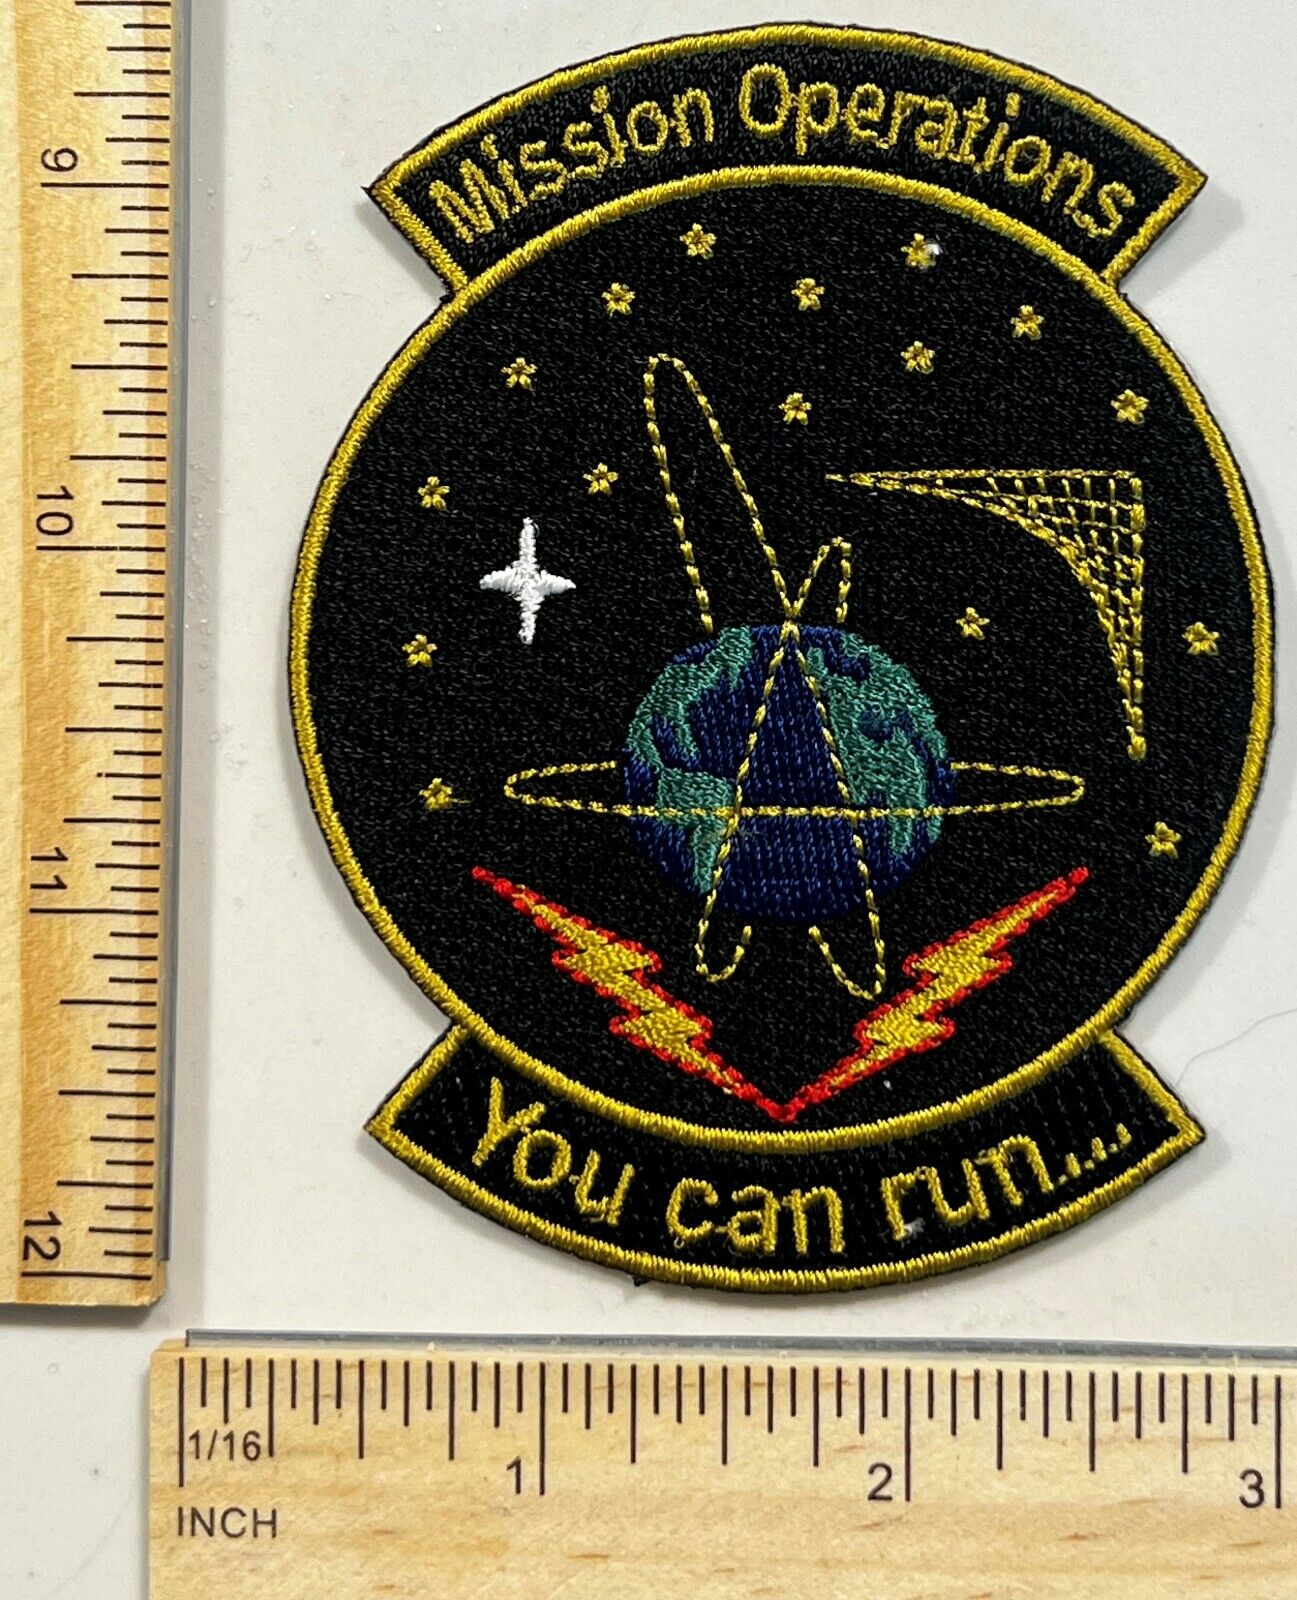 RARE - BLACK OPS MILITARY PATCH – MISSION OPERATIONS – YOU CAN RUN 